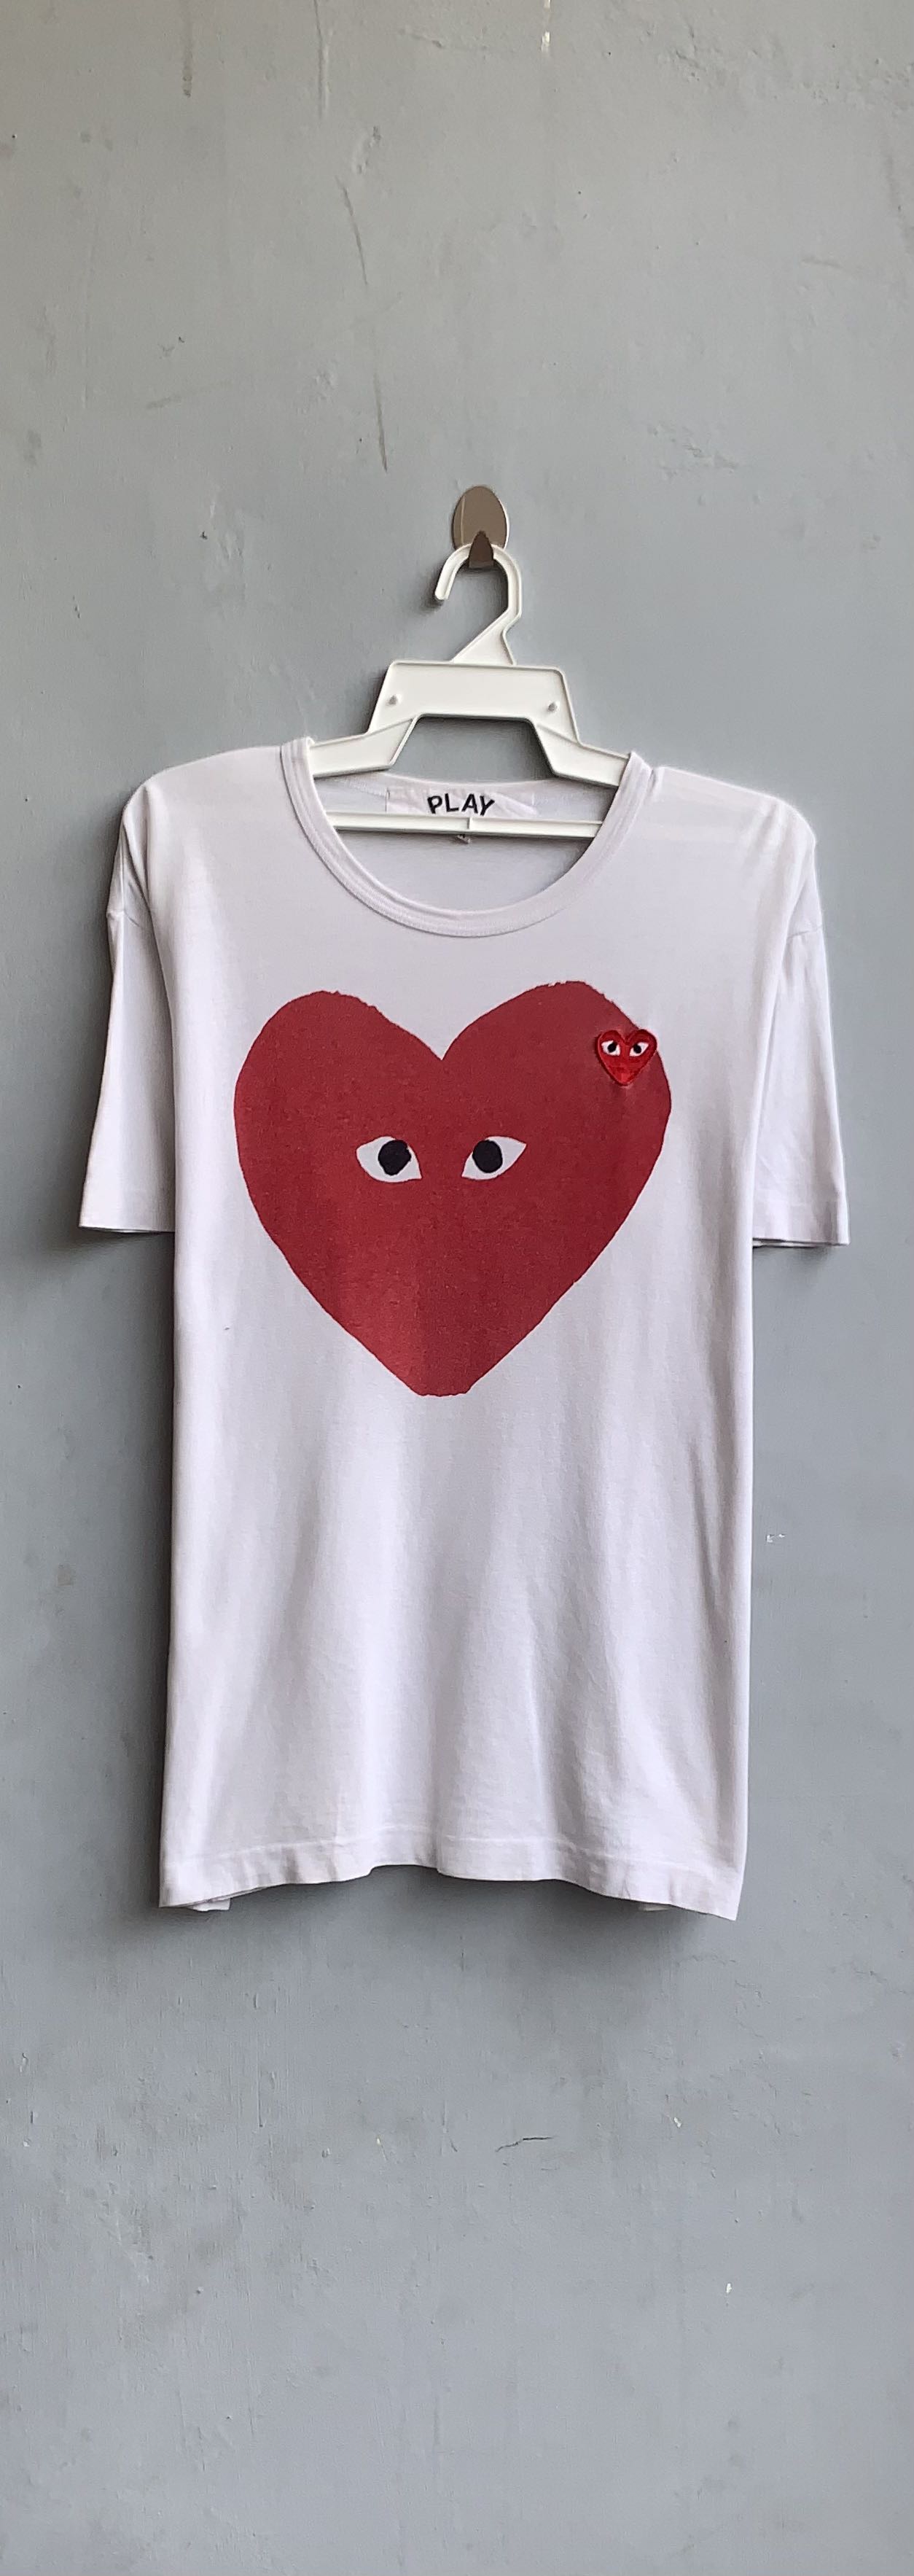 Vintage Comme Des Garcons Play Tee - 1